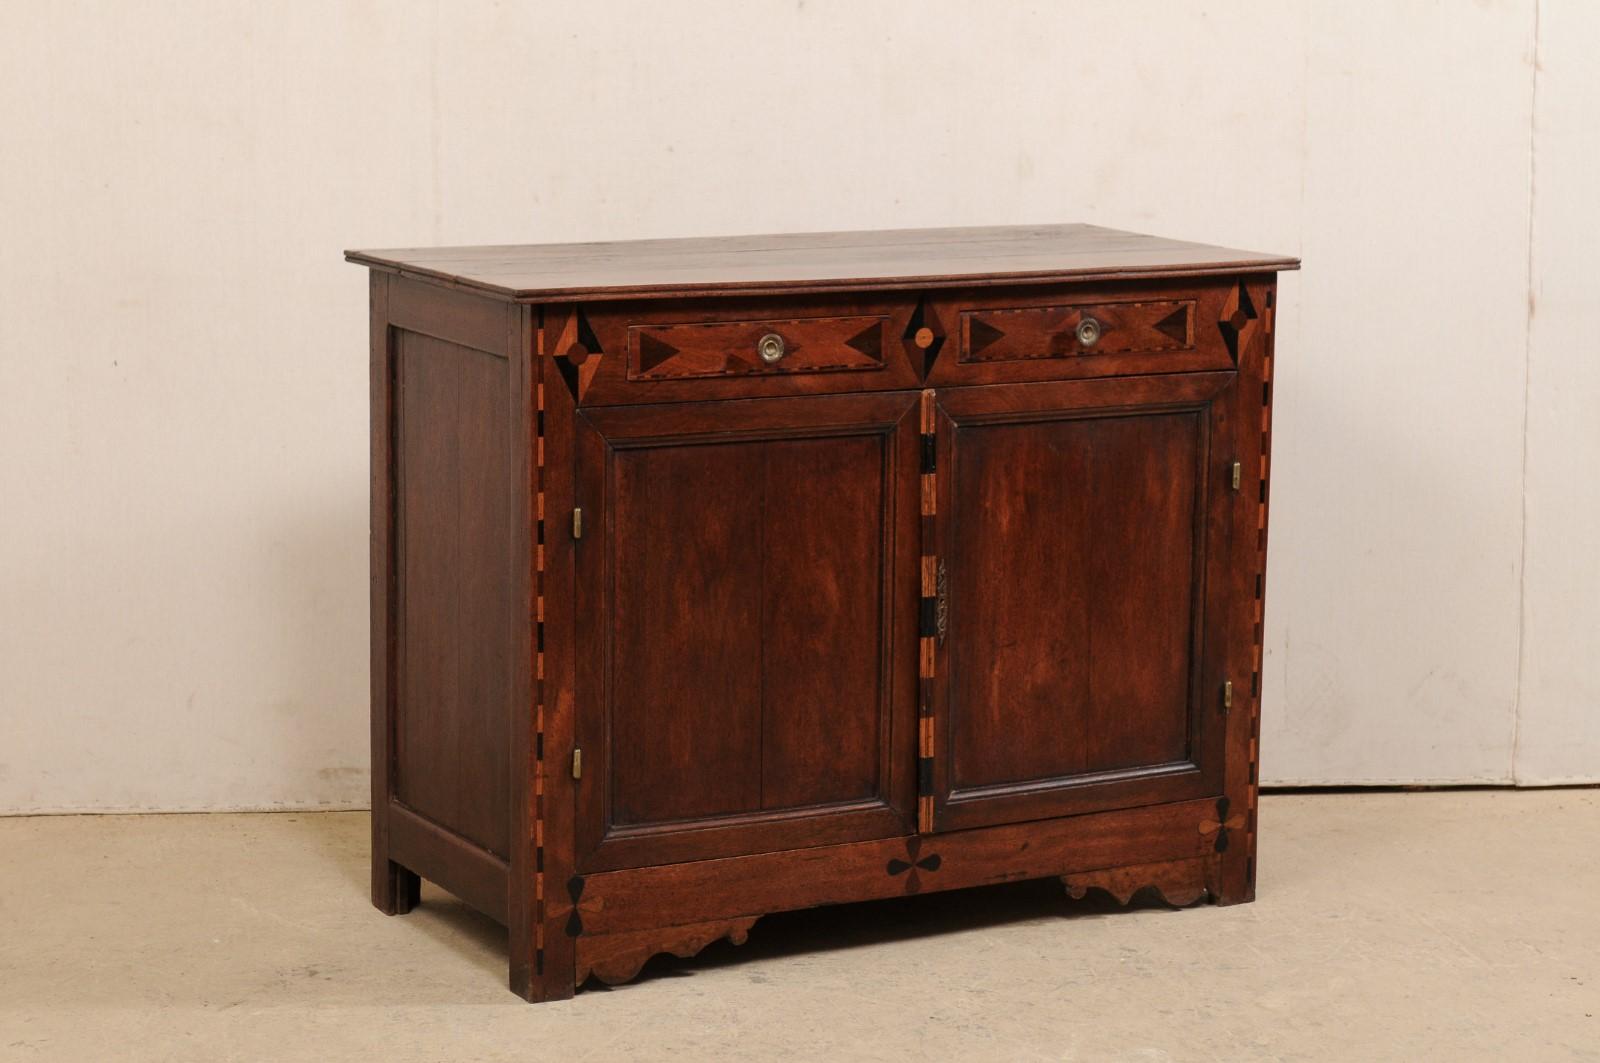 An English cabinet from the early 19th century. This antique buffet from England has a slightly overhanging top, over a base which houses two half-sized drawers at top, over a pair of doors beneath which open to reveal a shelf for additional storage